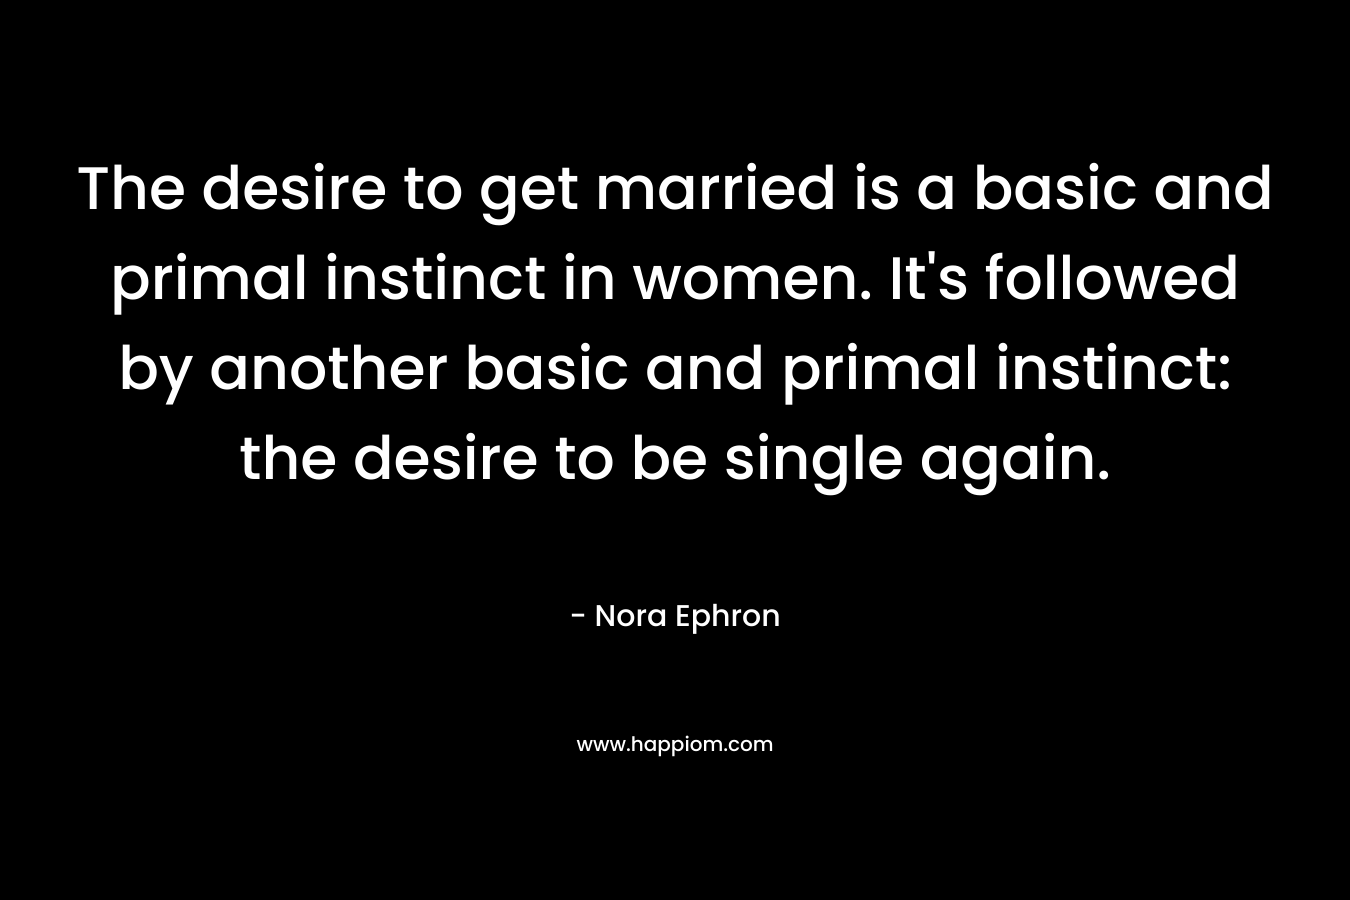 The desire to get married is a basic and primal instinct in women. It's followed by another basic and primal instinct: the desire to be single again.